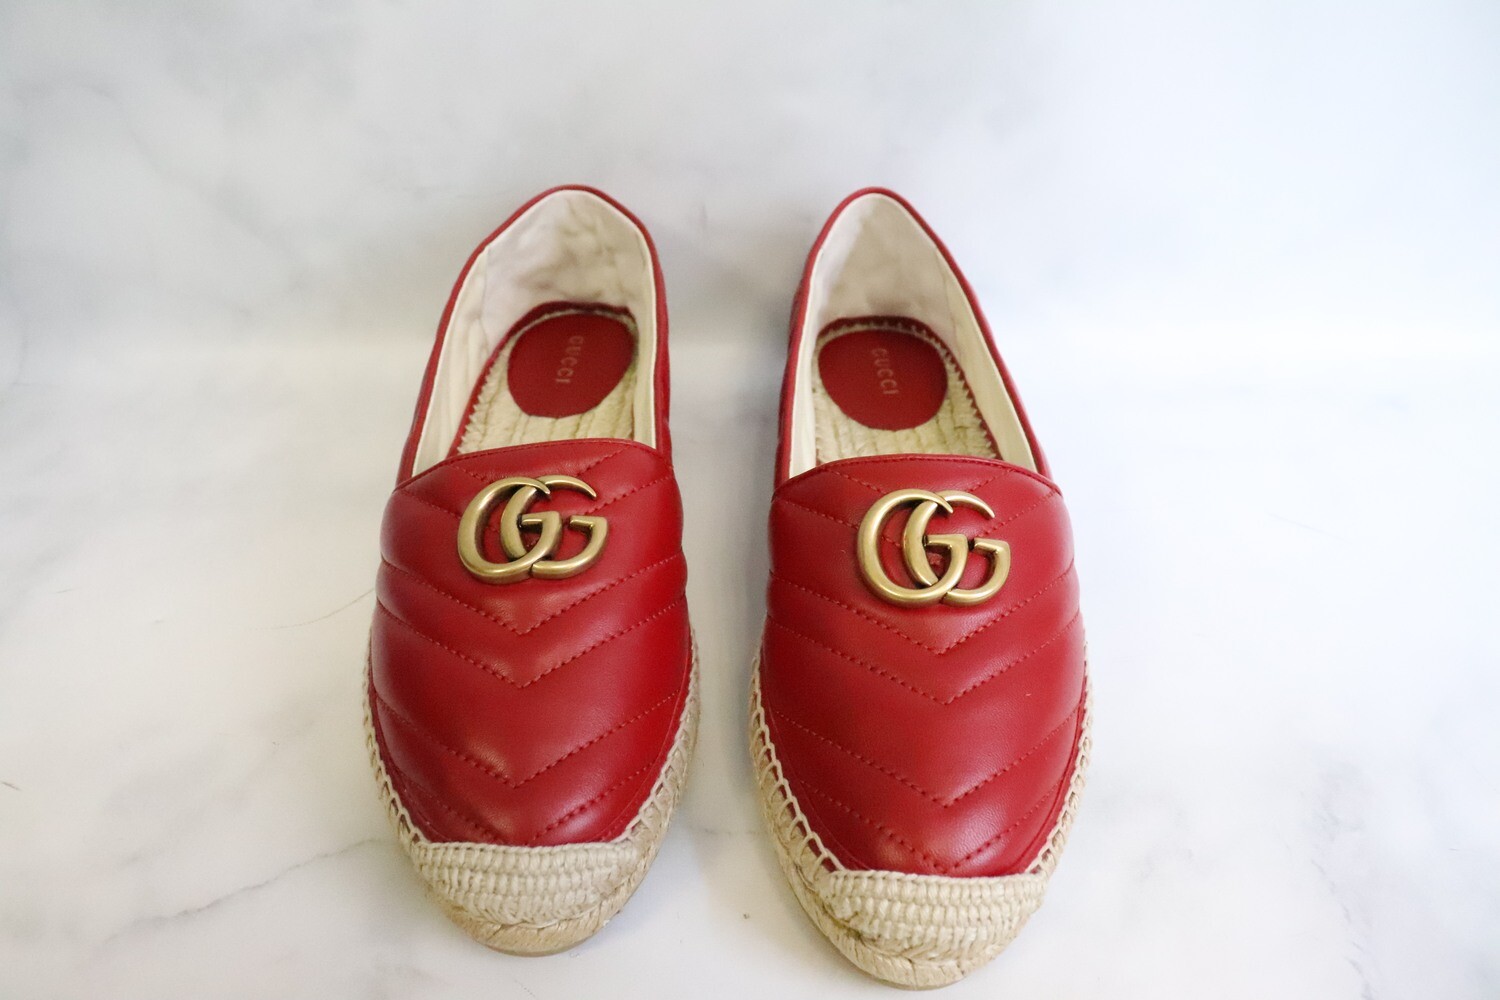 BOSTON Gucci Marmont Espadrilles, Hibiscus Red, Size 39.5, New in Box